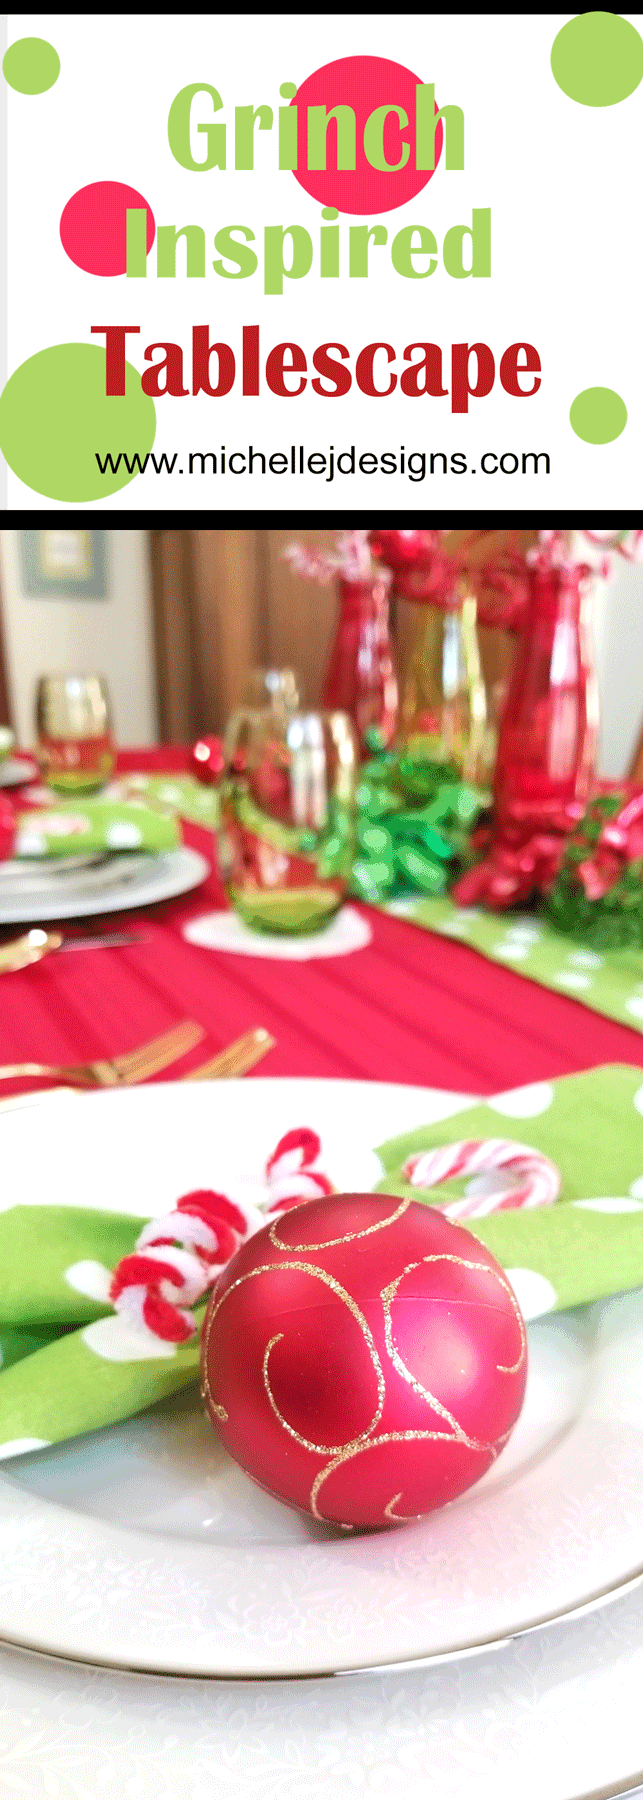 This year I decided to include a theme and create a fun table. I love my Grinch inspired table setting and I think my family will too! - www.michellejdesigns.com